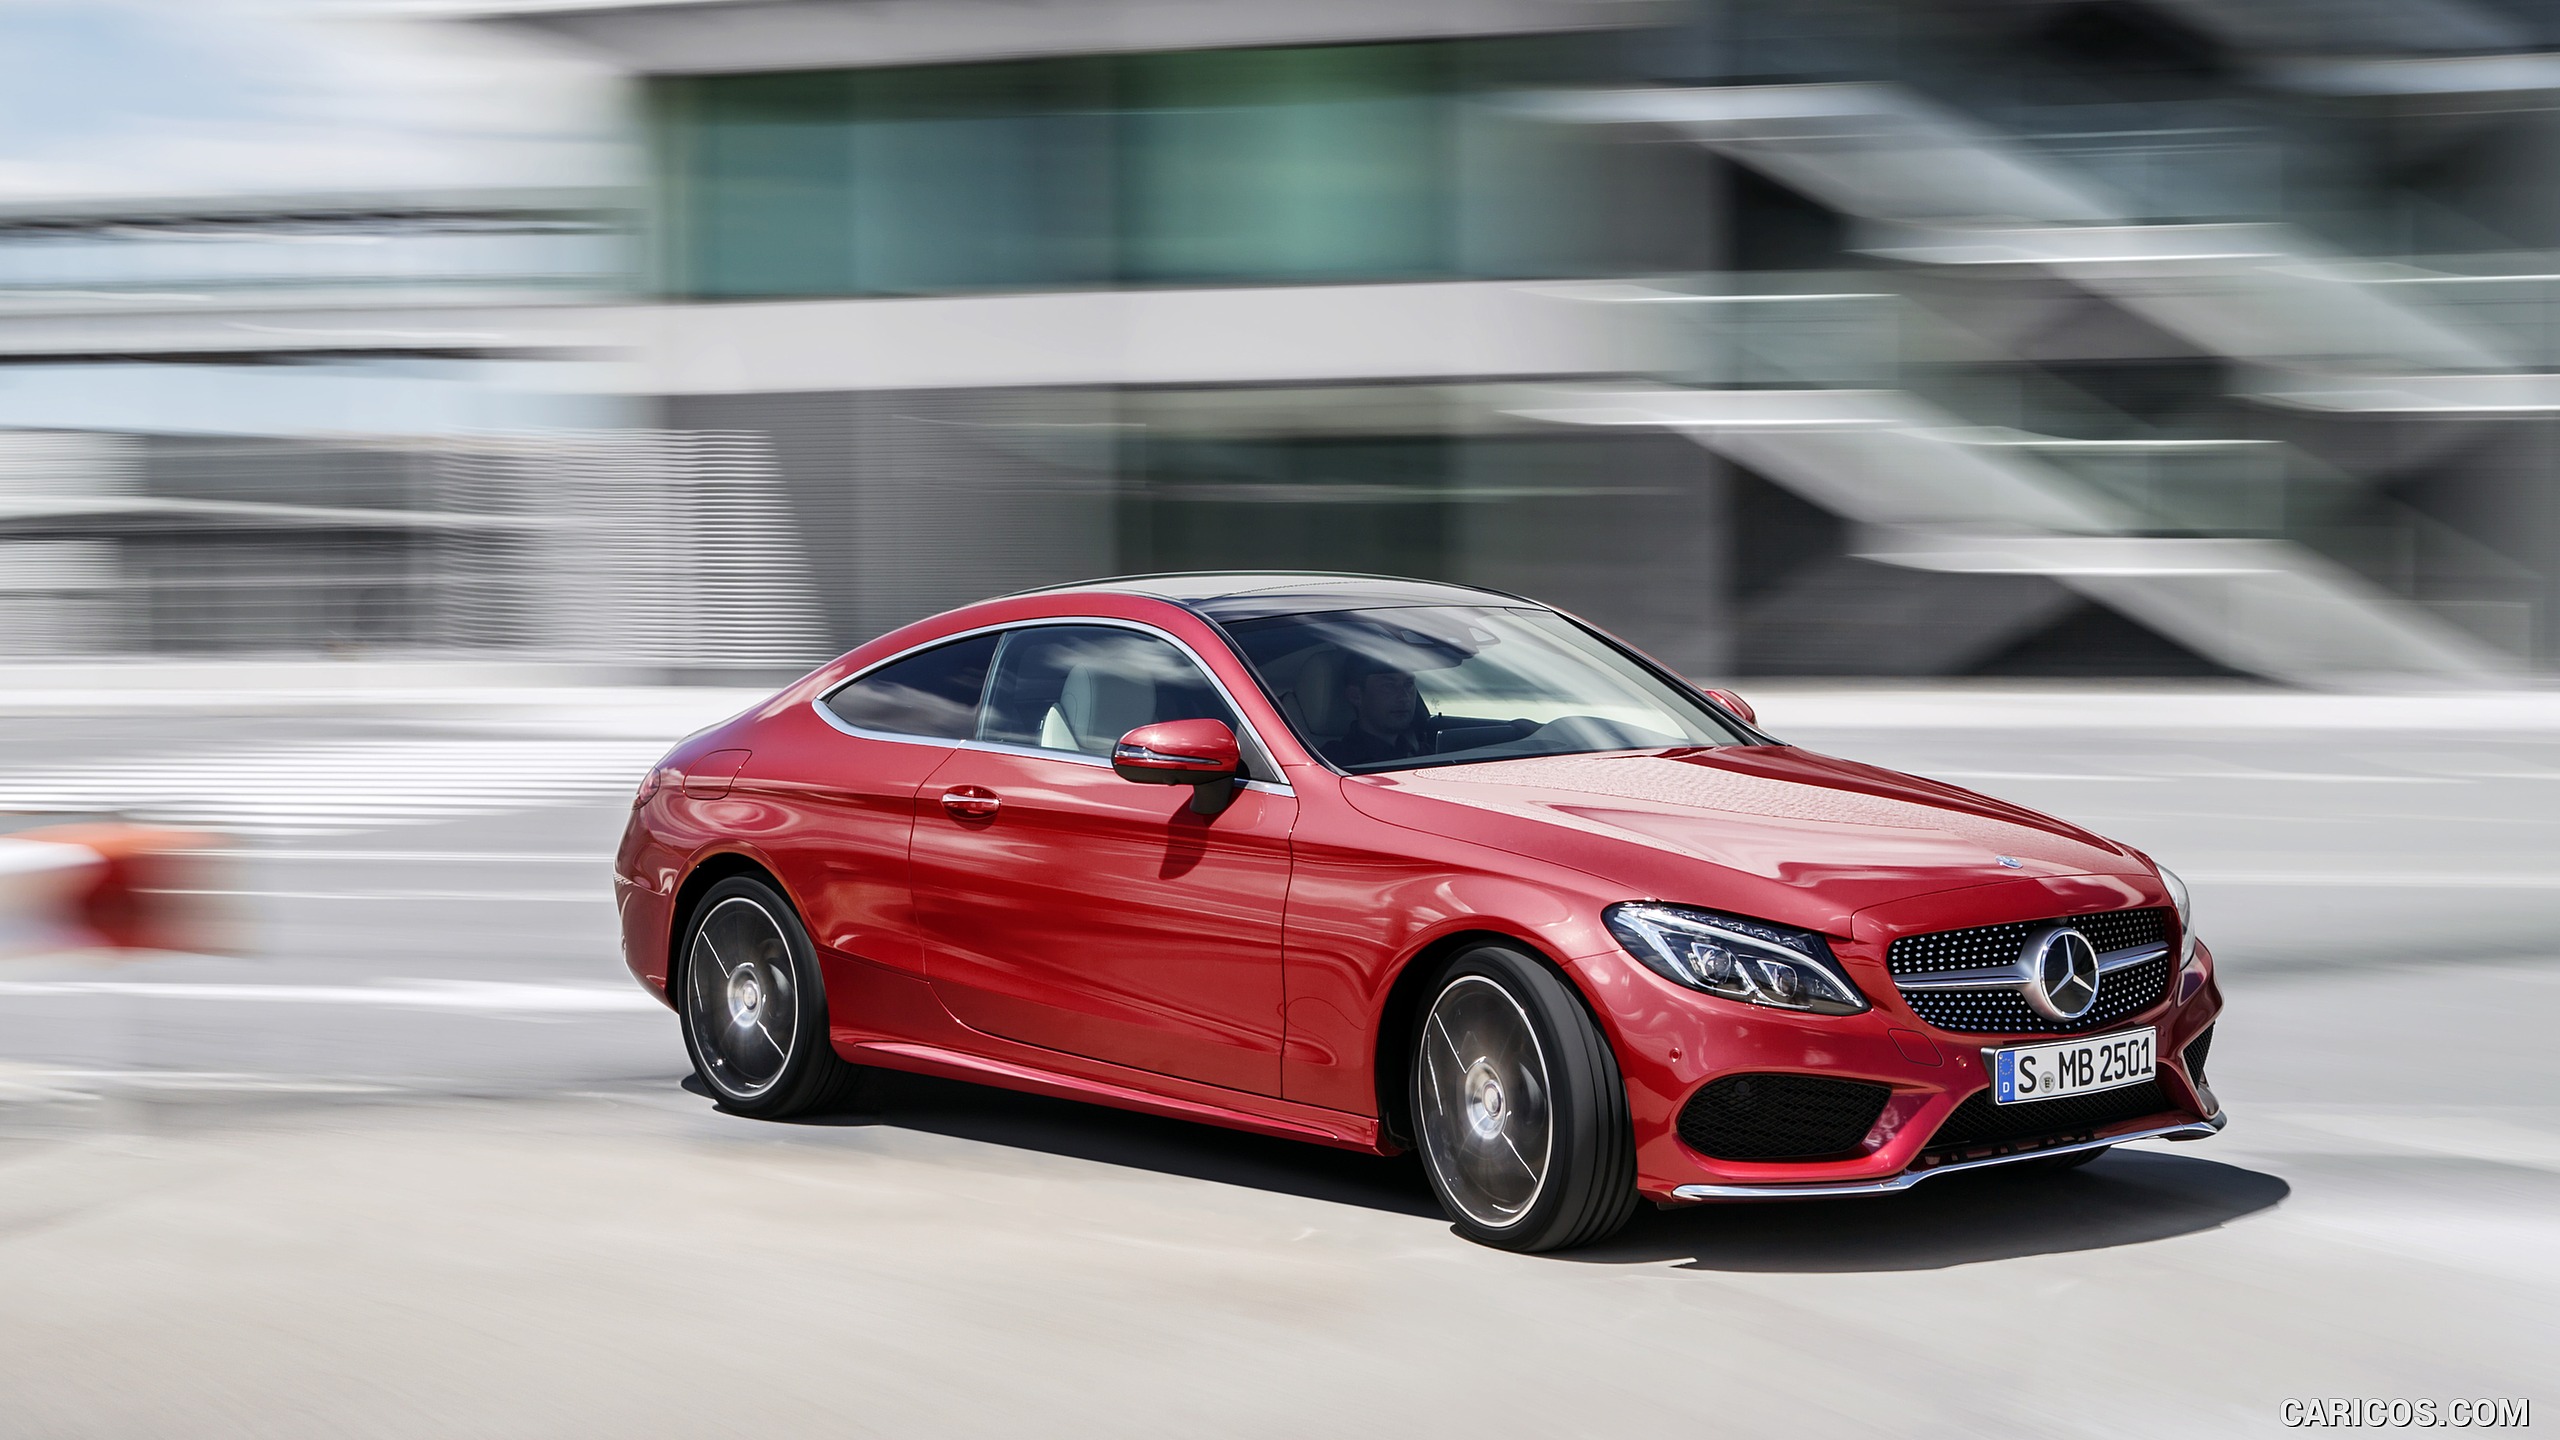 2017 Mercedes-Benz C-Class Coupe C250 d 4MATIC (Hyacinth Red) - , #20 of 210